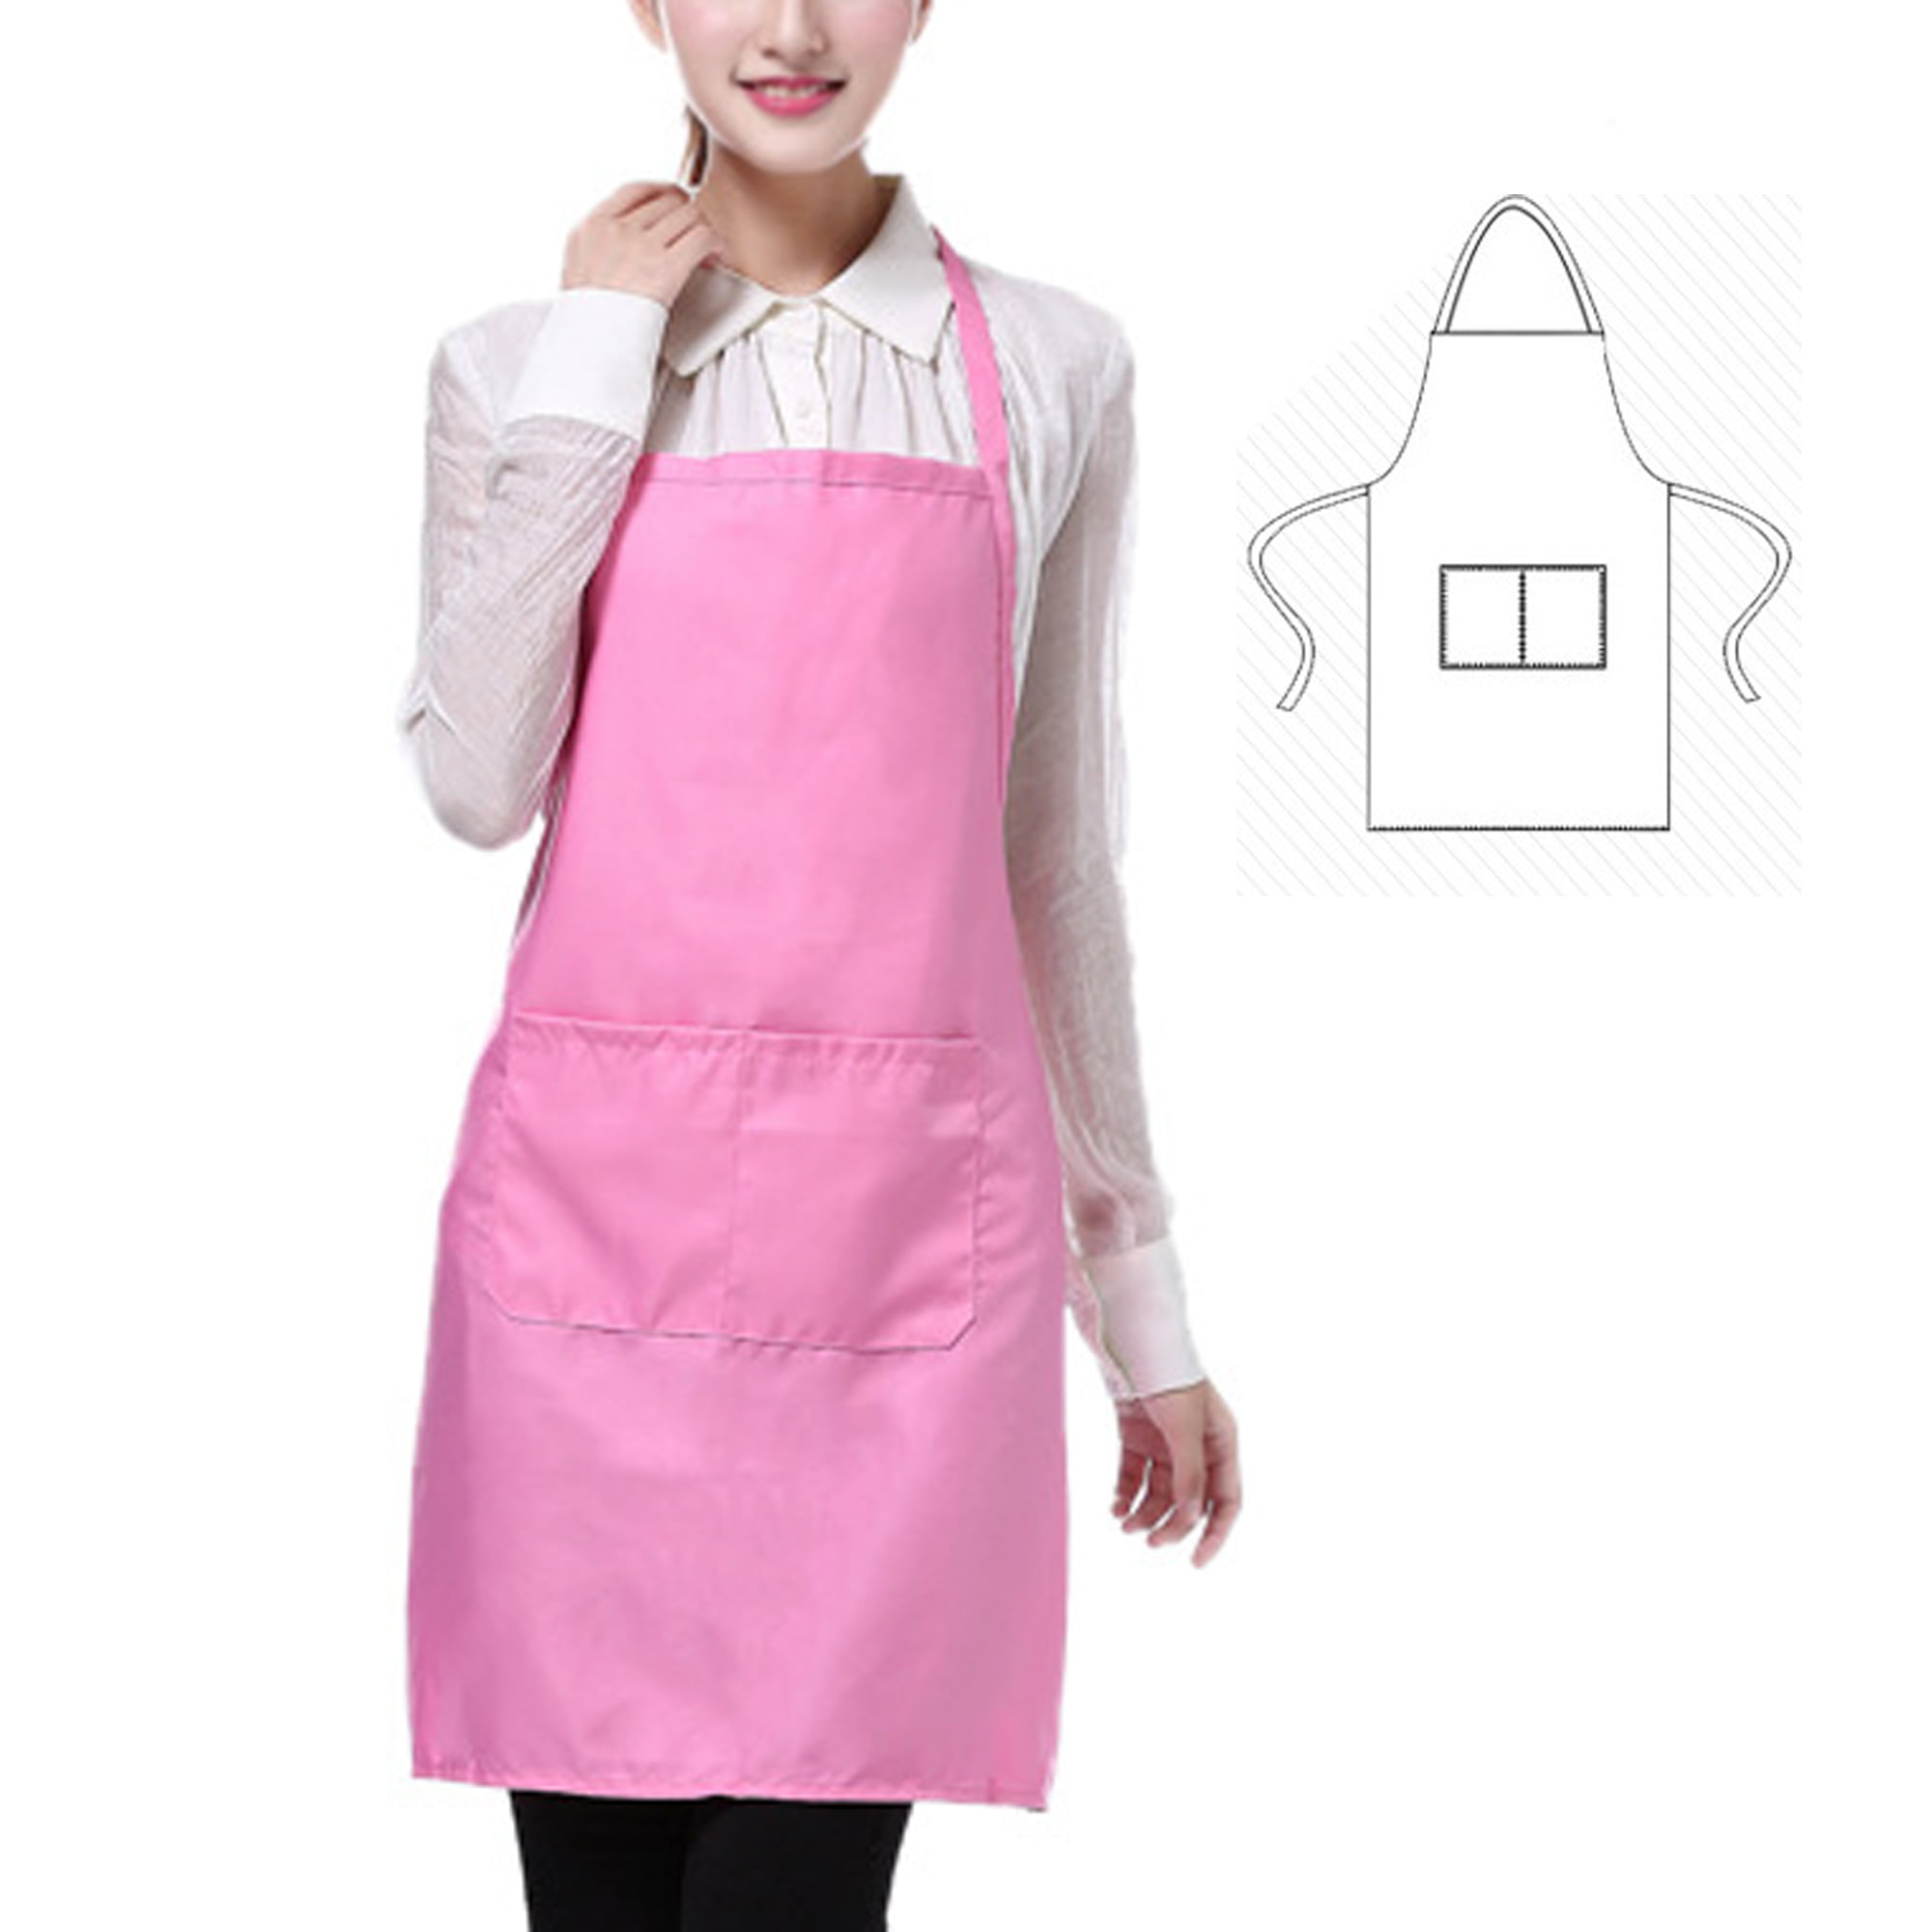 Baking Grill Holidays, SWEET TANG Men Women Professional Chef Bib Aprons Kitchen Apron Water Resistant Apron with Visible Center Pocket for Cooking BBQ Alpha Phii Alpha Greek Letters 